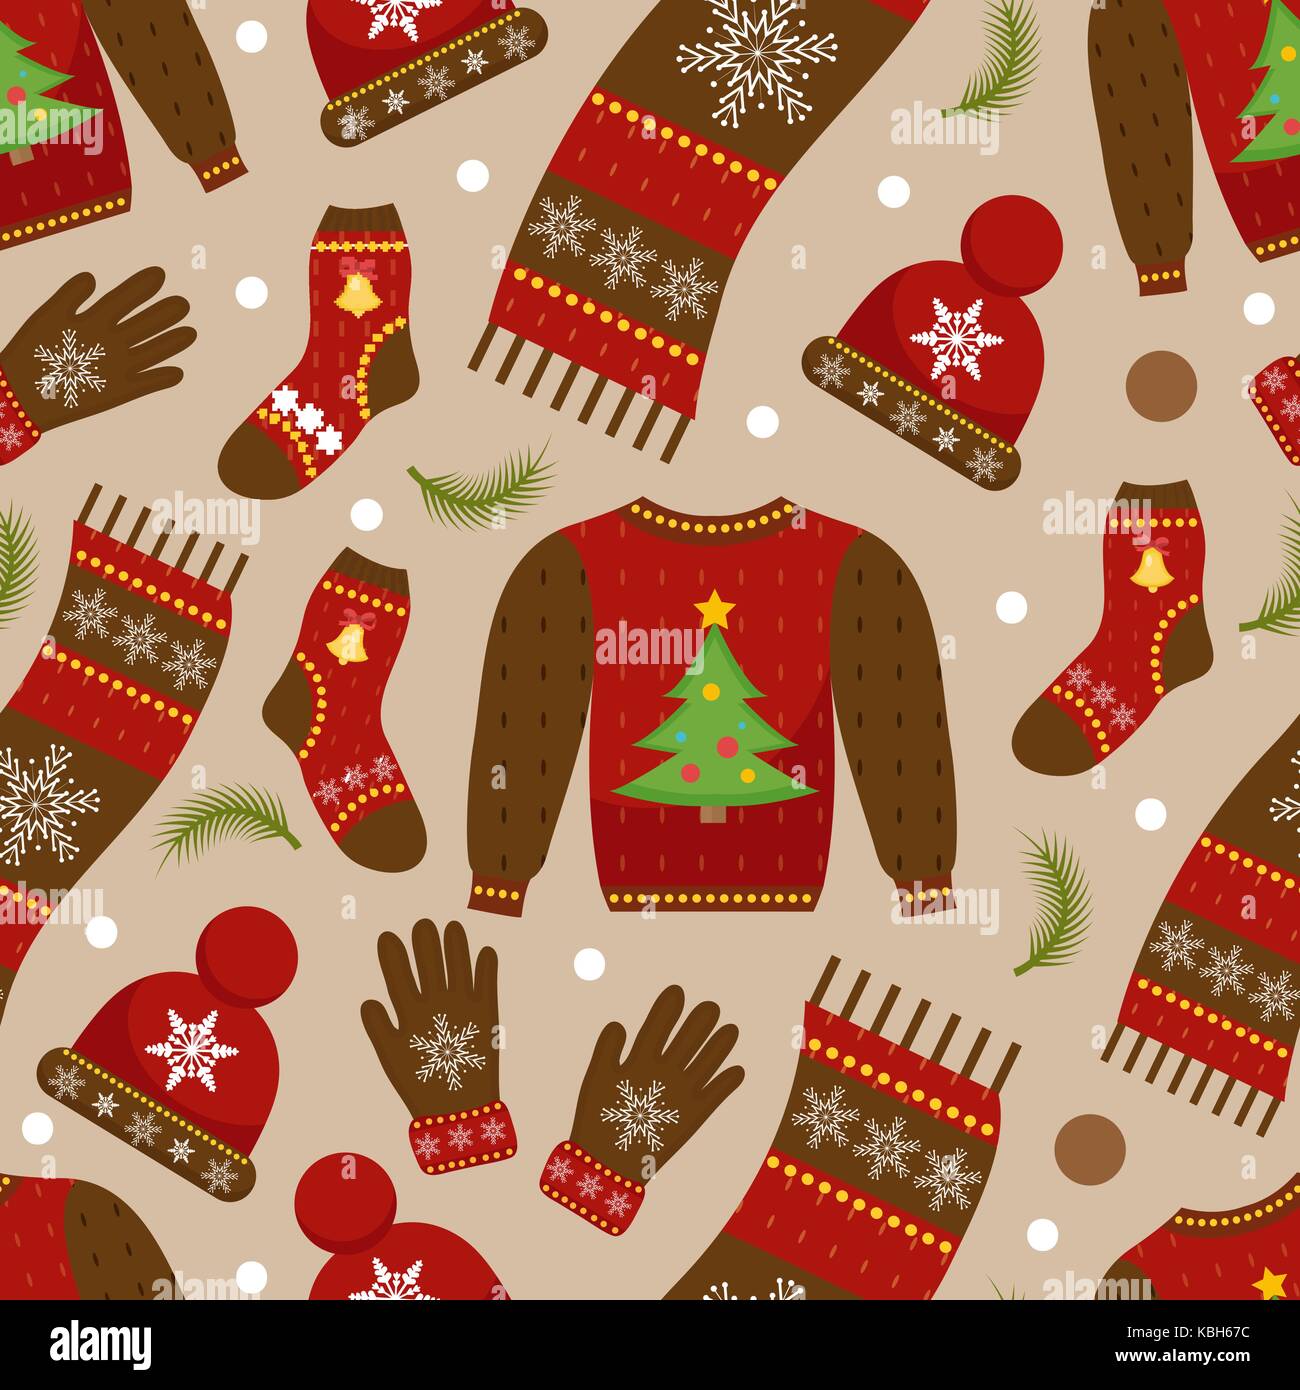 Winter apparel seamless pattern. Christmas clothes repeating texture. Warm clothing Infinite background. Sweater, gloves, hat, socks. Vector illustration. Stock Vector